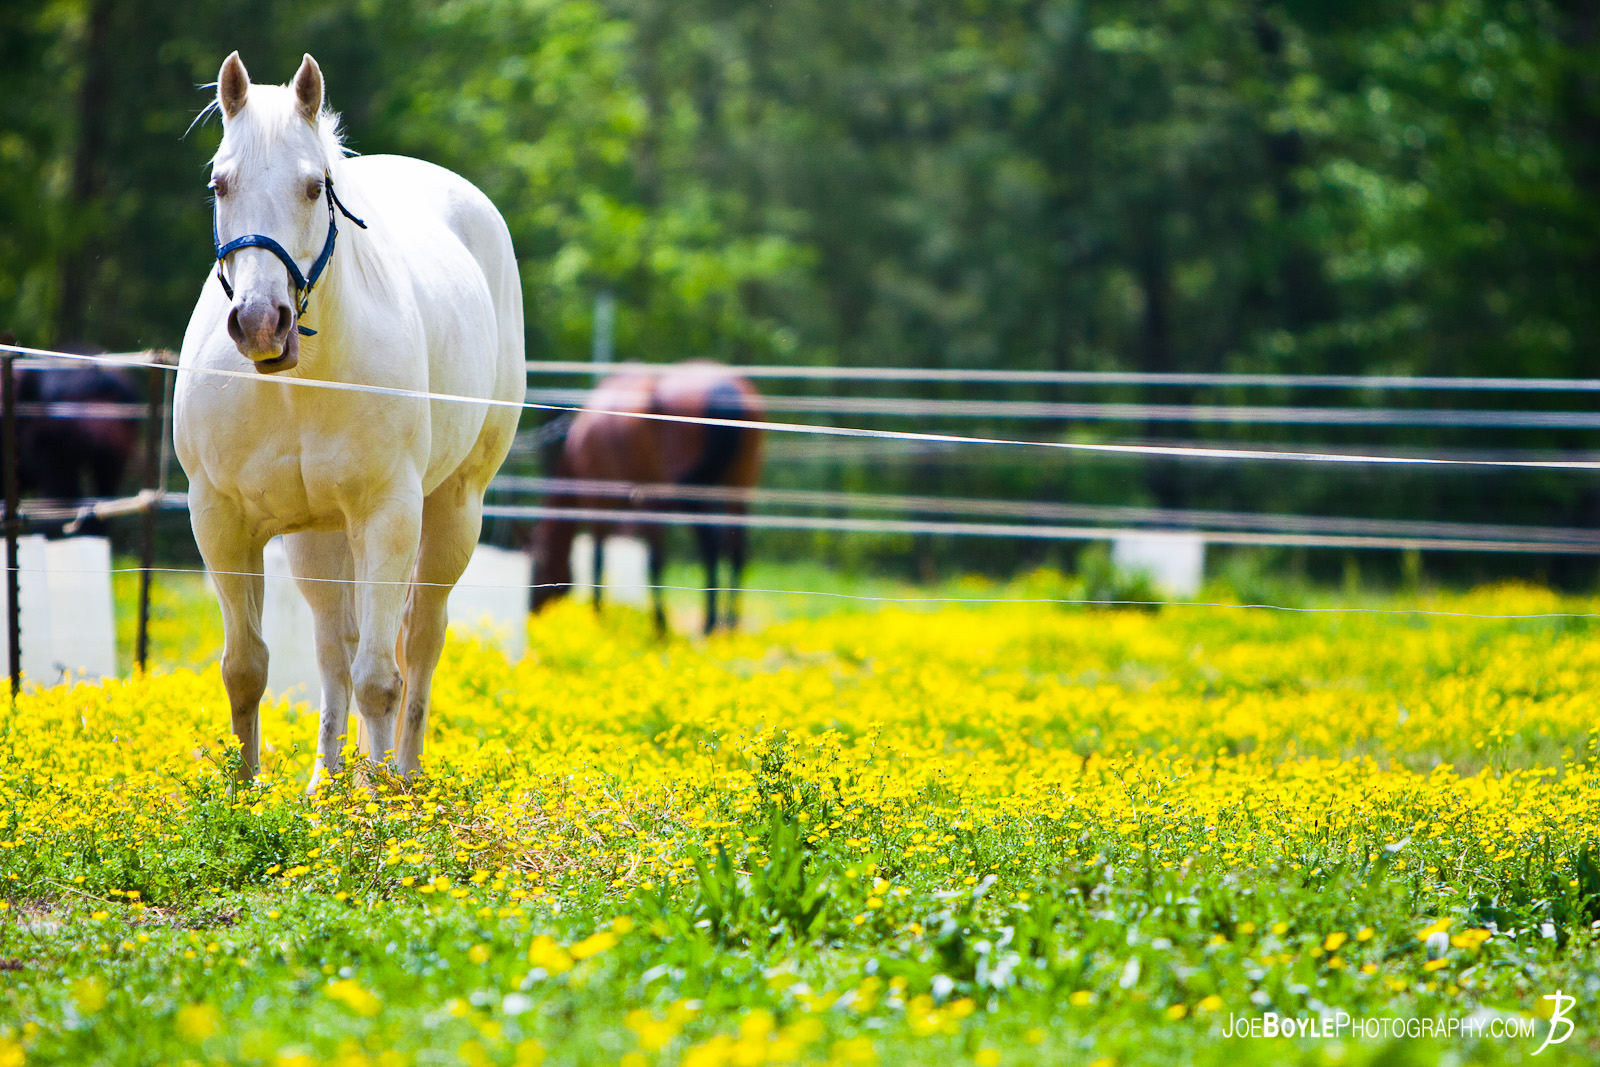   While at "Neigh Day" presented by Diamonds in the Rough Horses (Equine) Rescue Shelter, I was walking through the Horse Pastures and captured a picture of this white horse standing in the green field. 